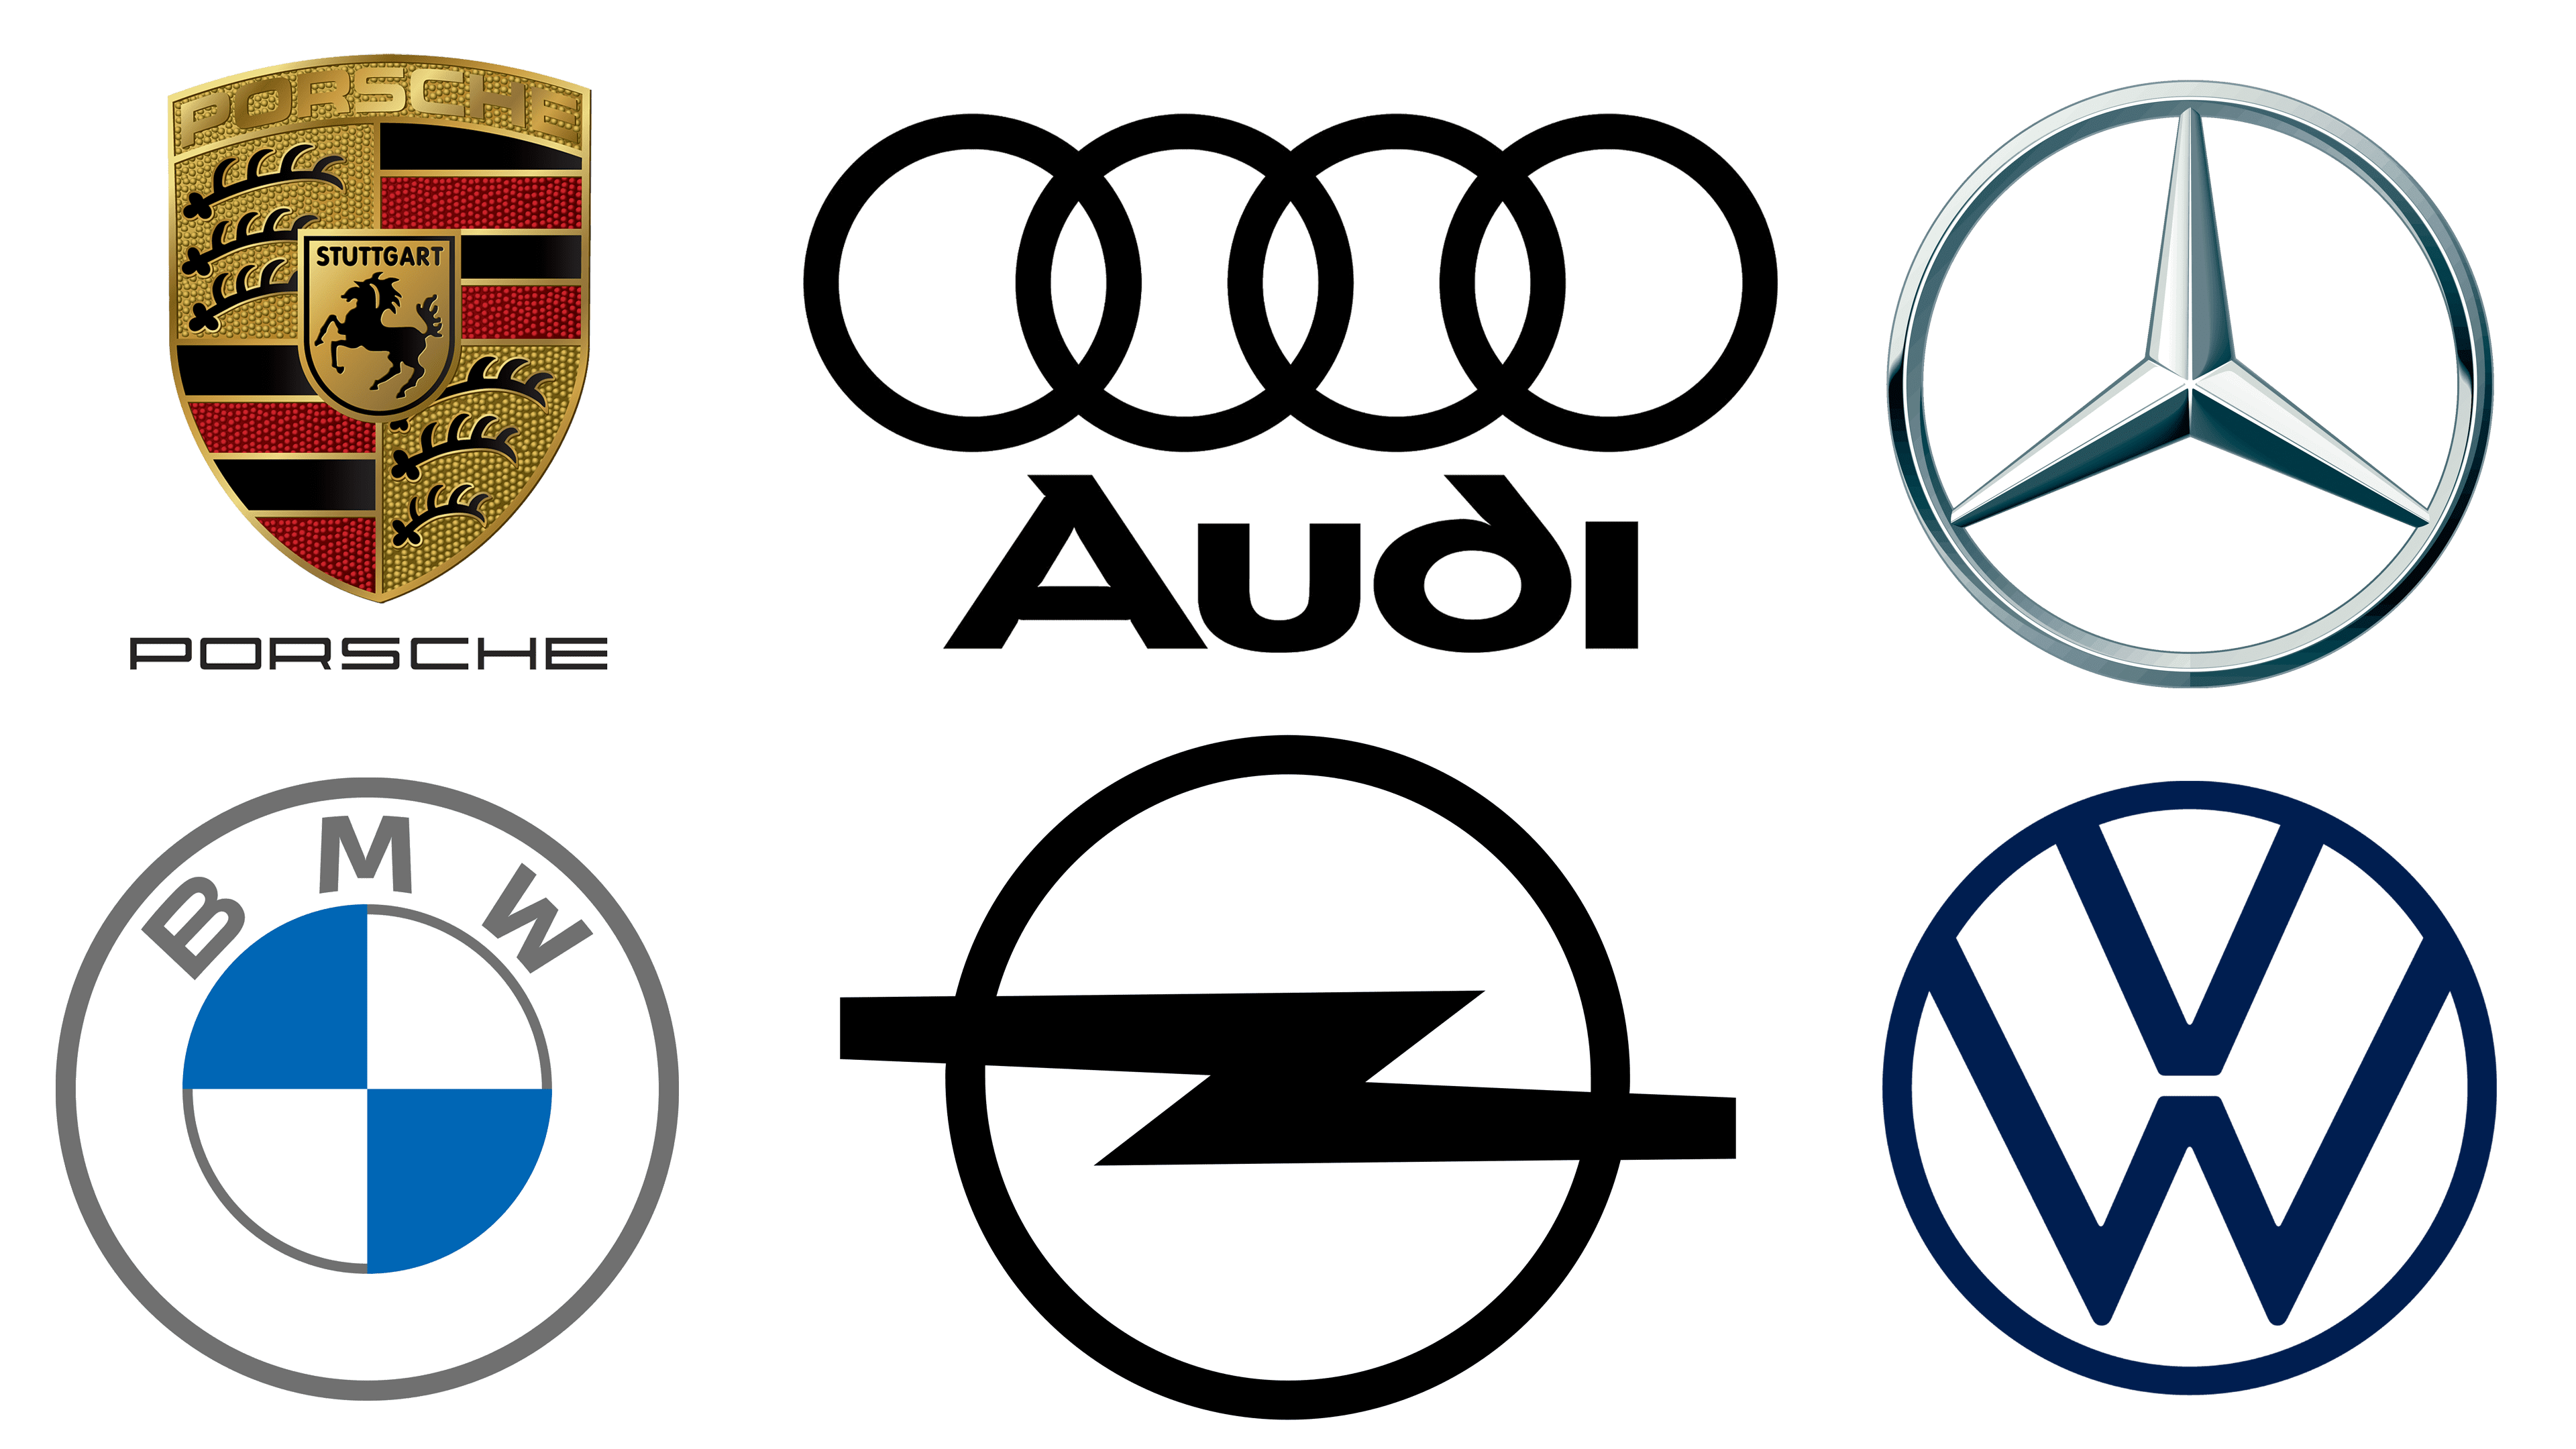 Famous Car Logos: Car Brand Logos, Names And Meanings